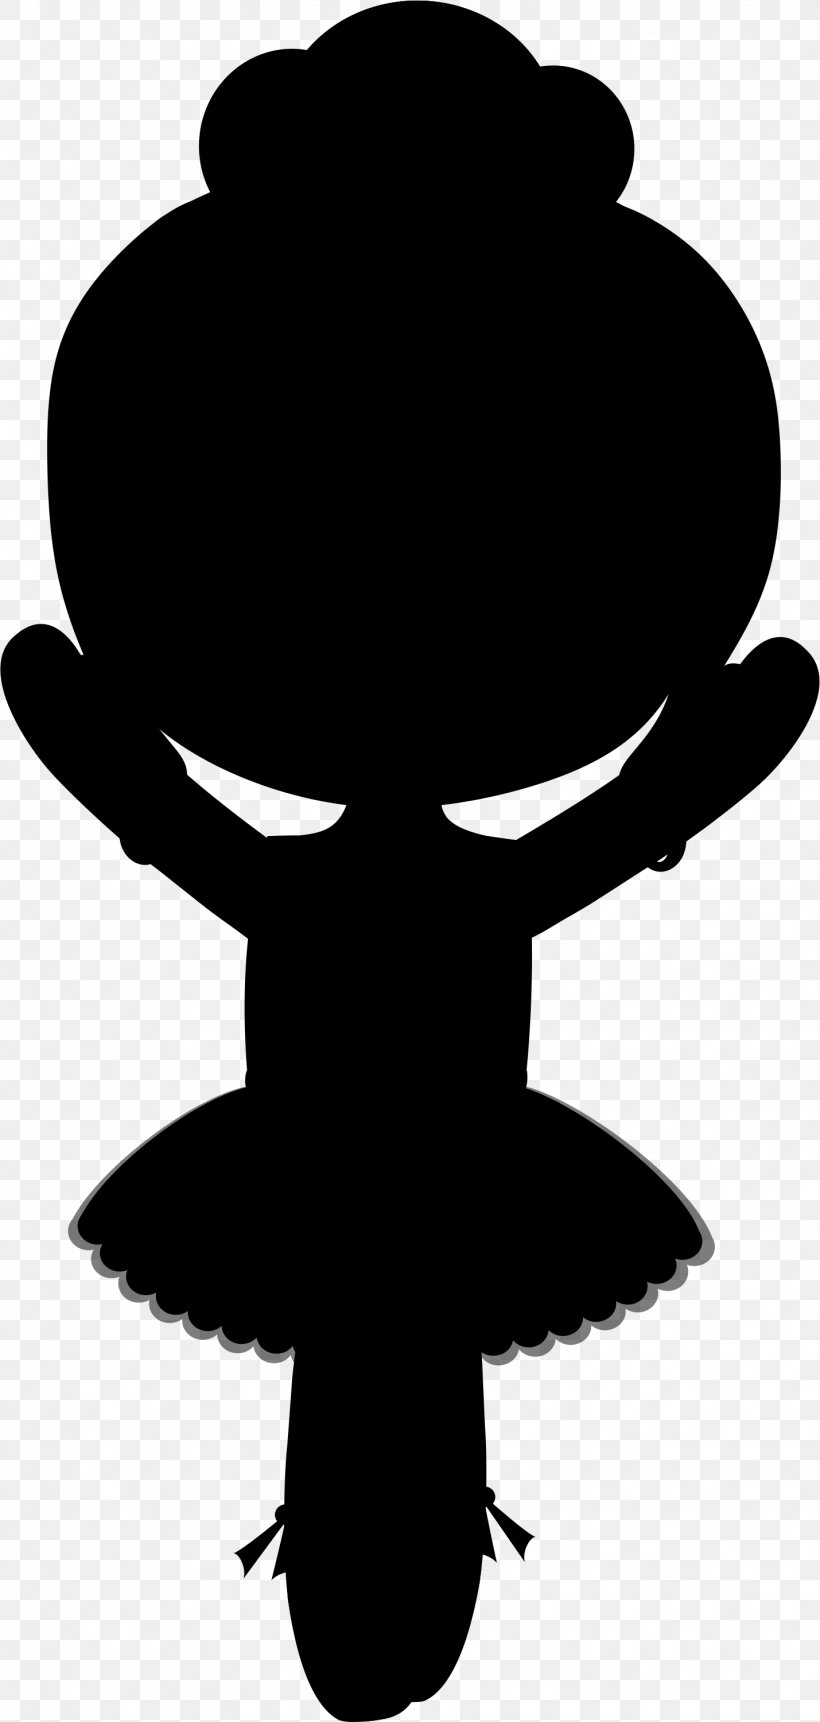 Clip Art Character Silhouette Fiction Black M, PNG, 1429x3001px, Character, Black M, Blackandwhite, Fiction, Silhouette Download Free